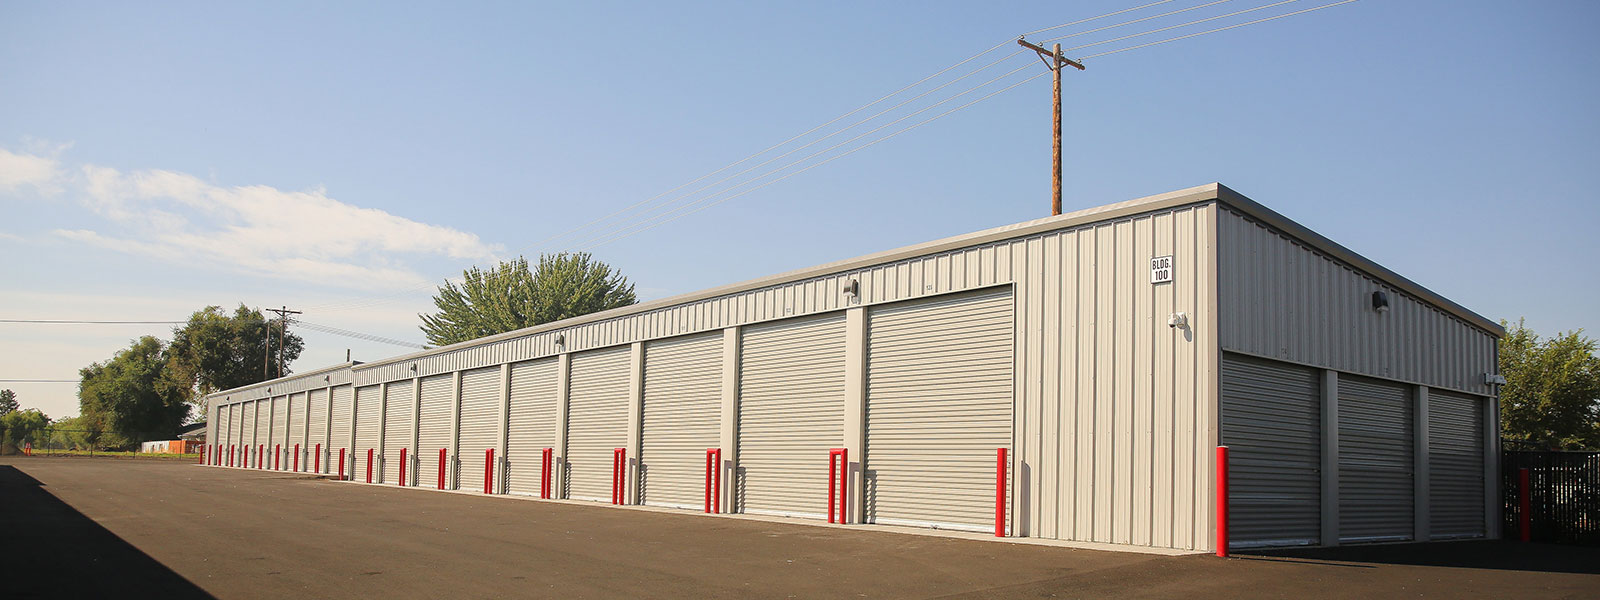 View of storage building